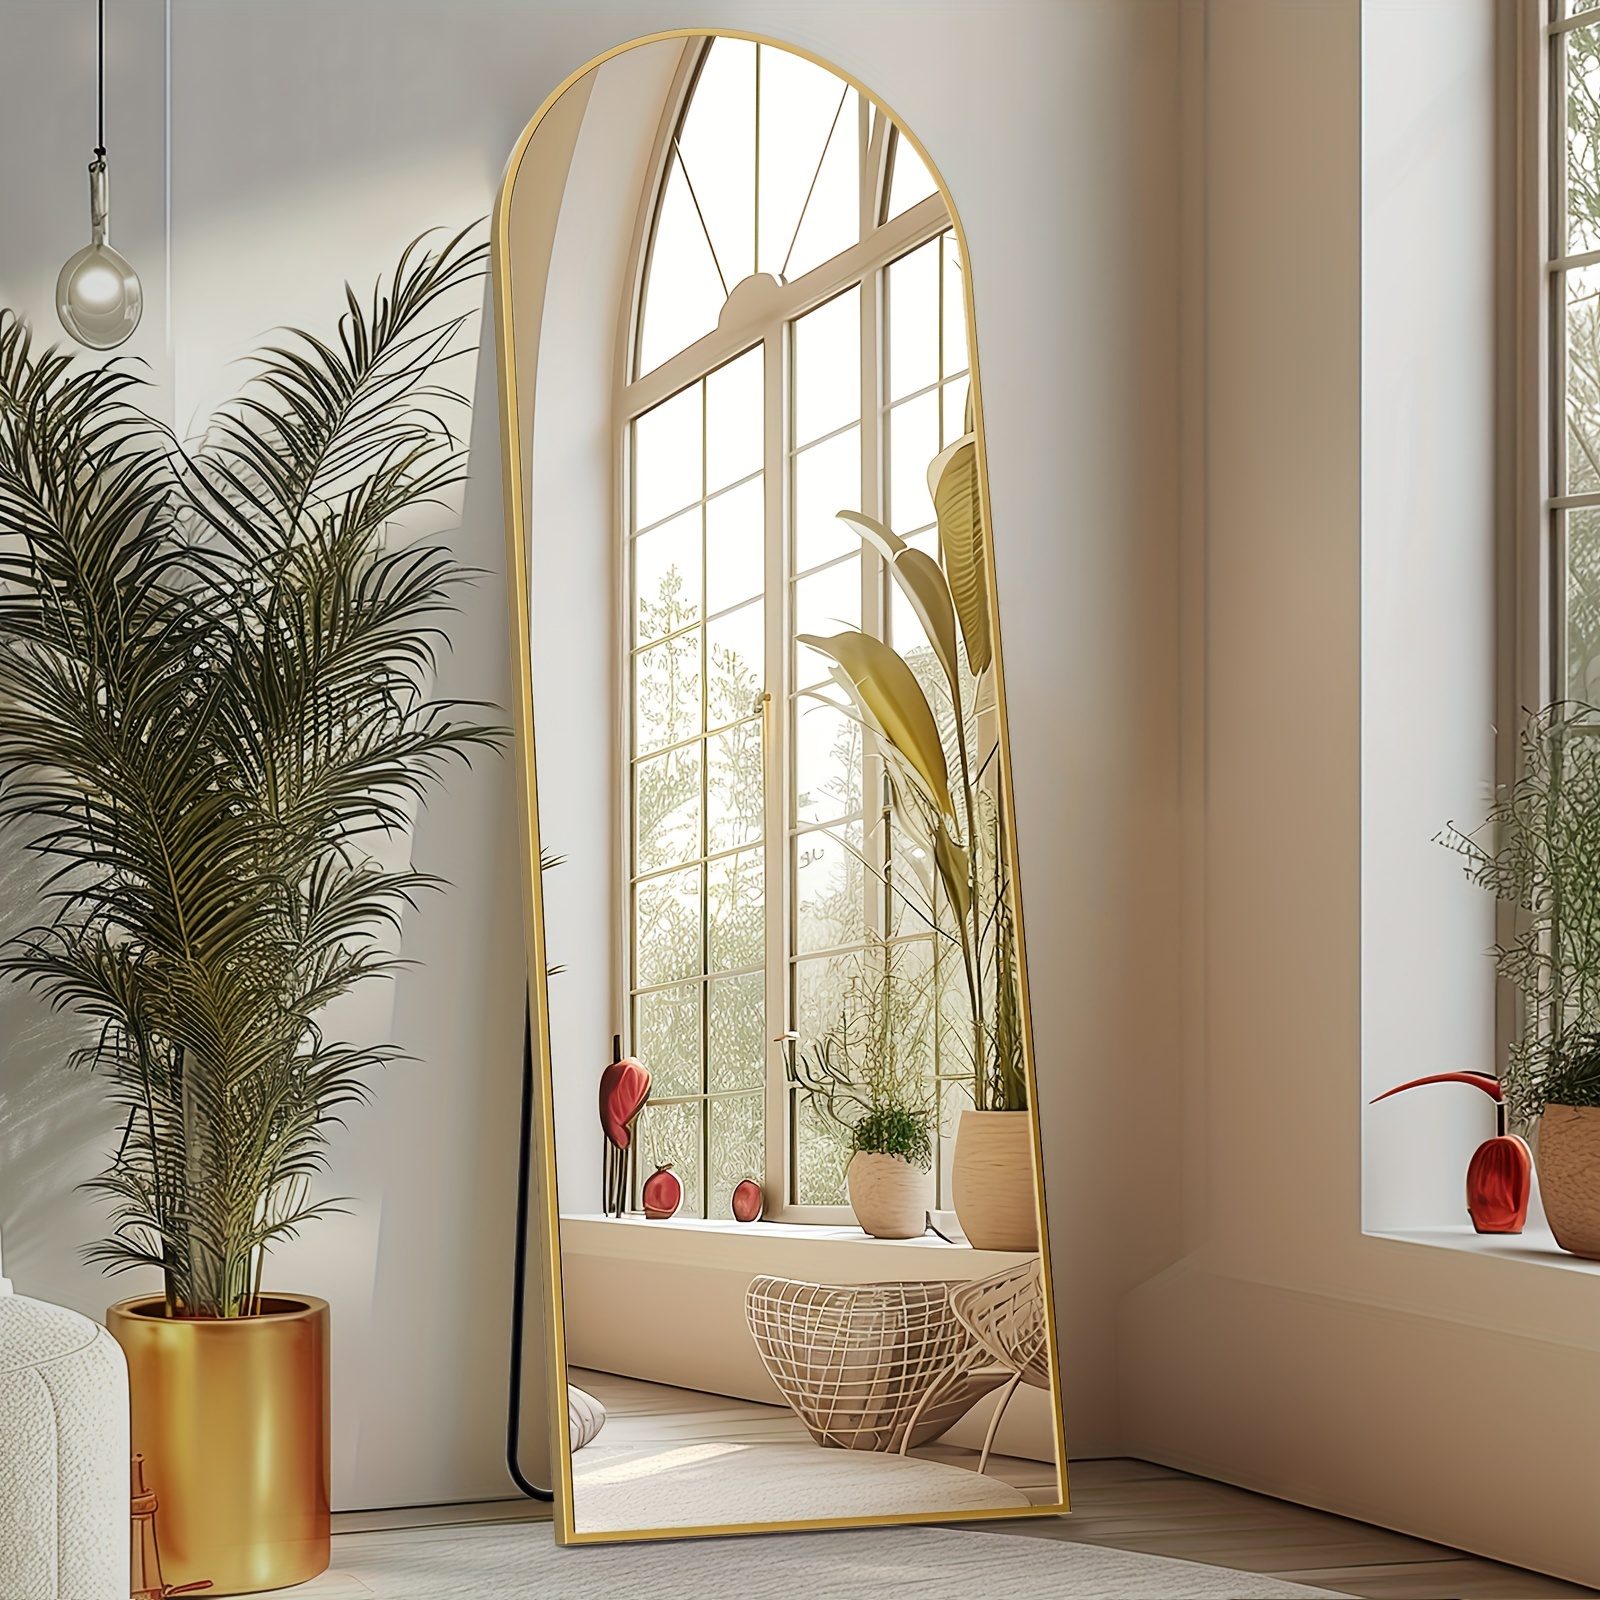 

Mirror Full Length, Body Wall Mirrors With Shatter-proof Glass, Floor Standing, Hanging Or Leaning, Large Tall Arch Mirror With Stand Aluminum Alloy Frame For Bedroom Cloakroom